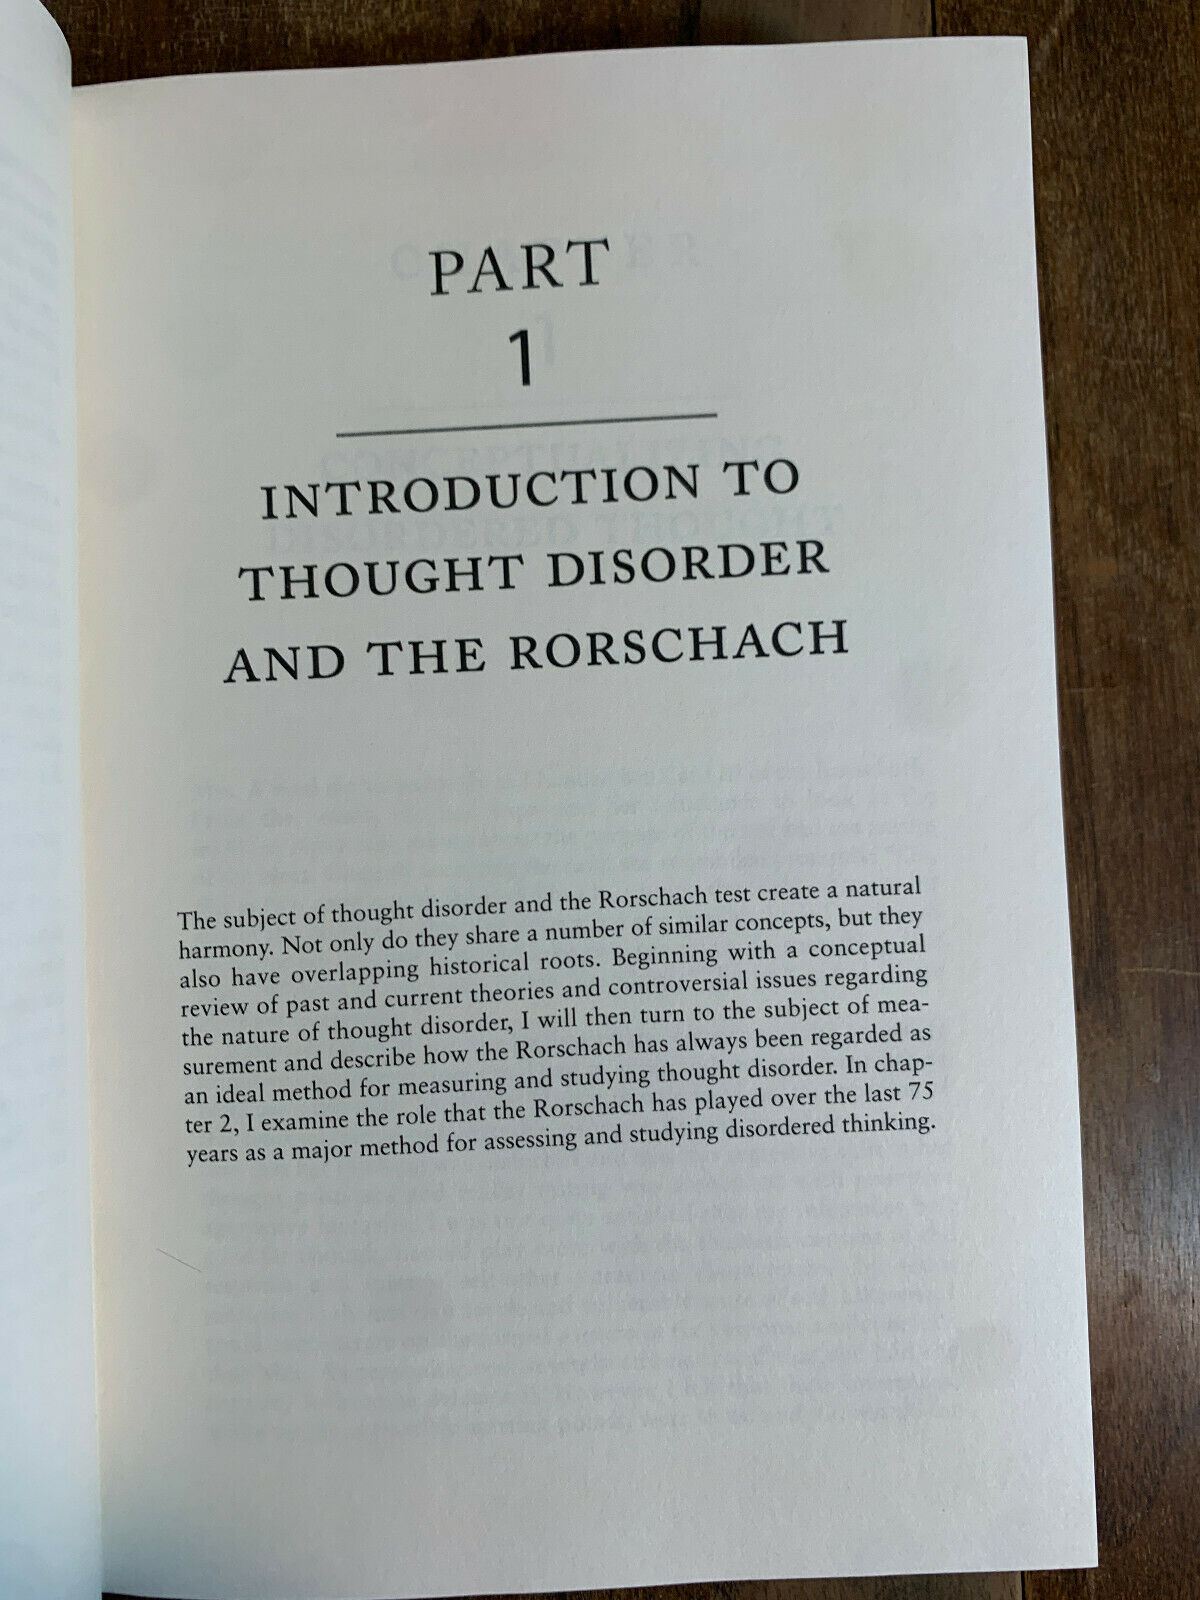 Disordered Thinking and the Rorschach, James Kleigher, (1999), Z1